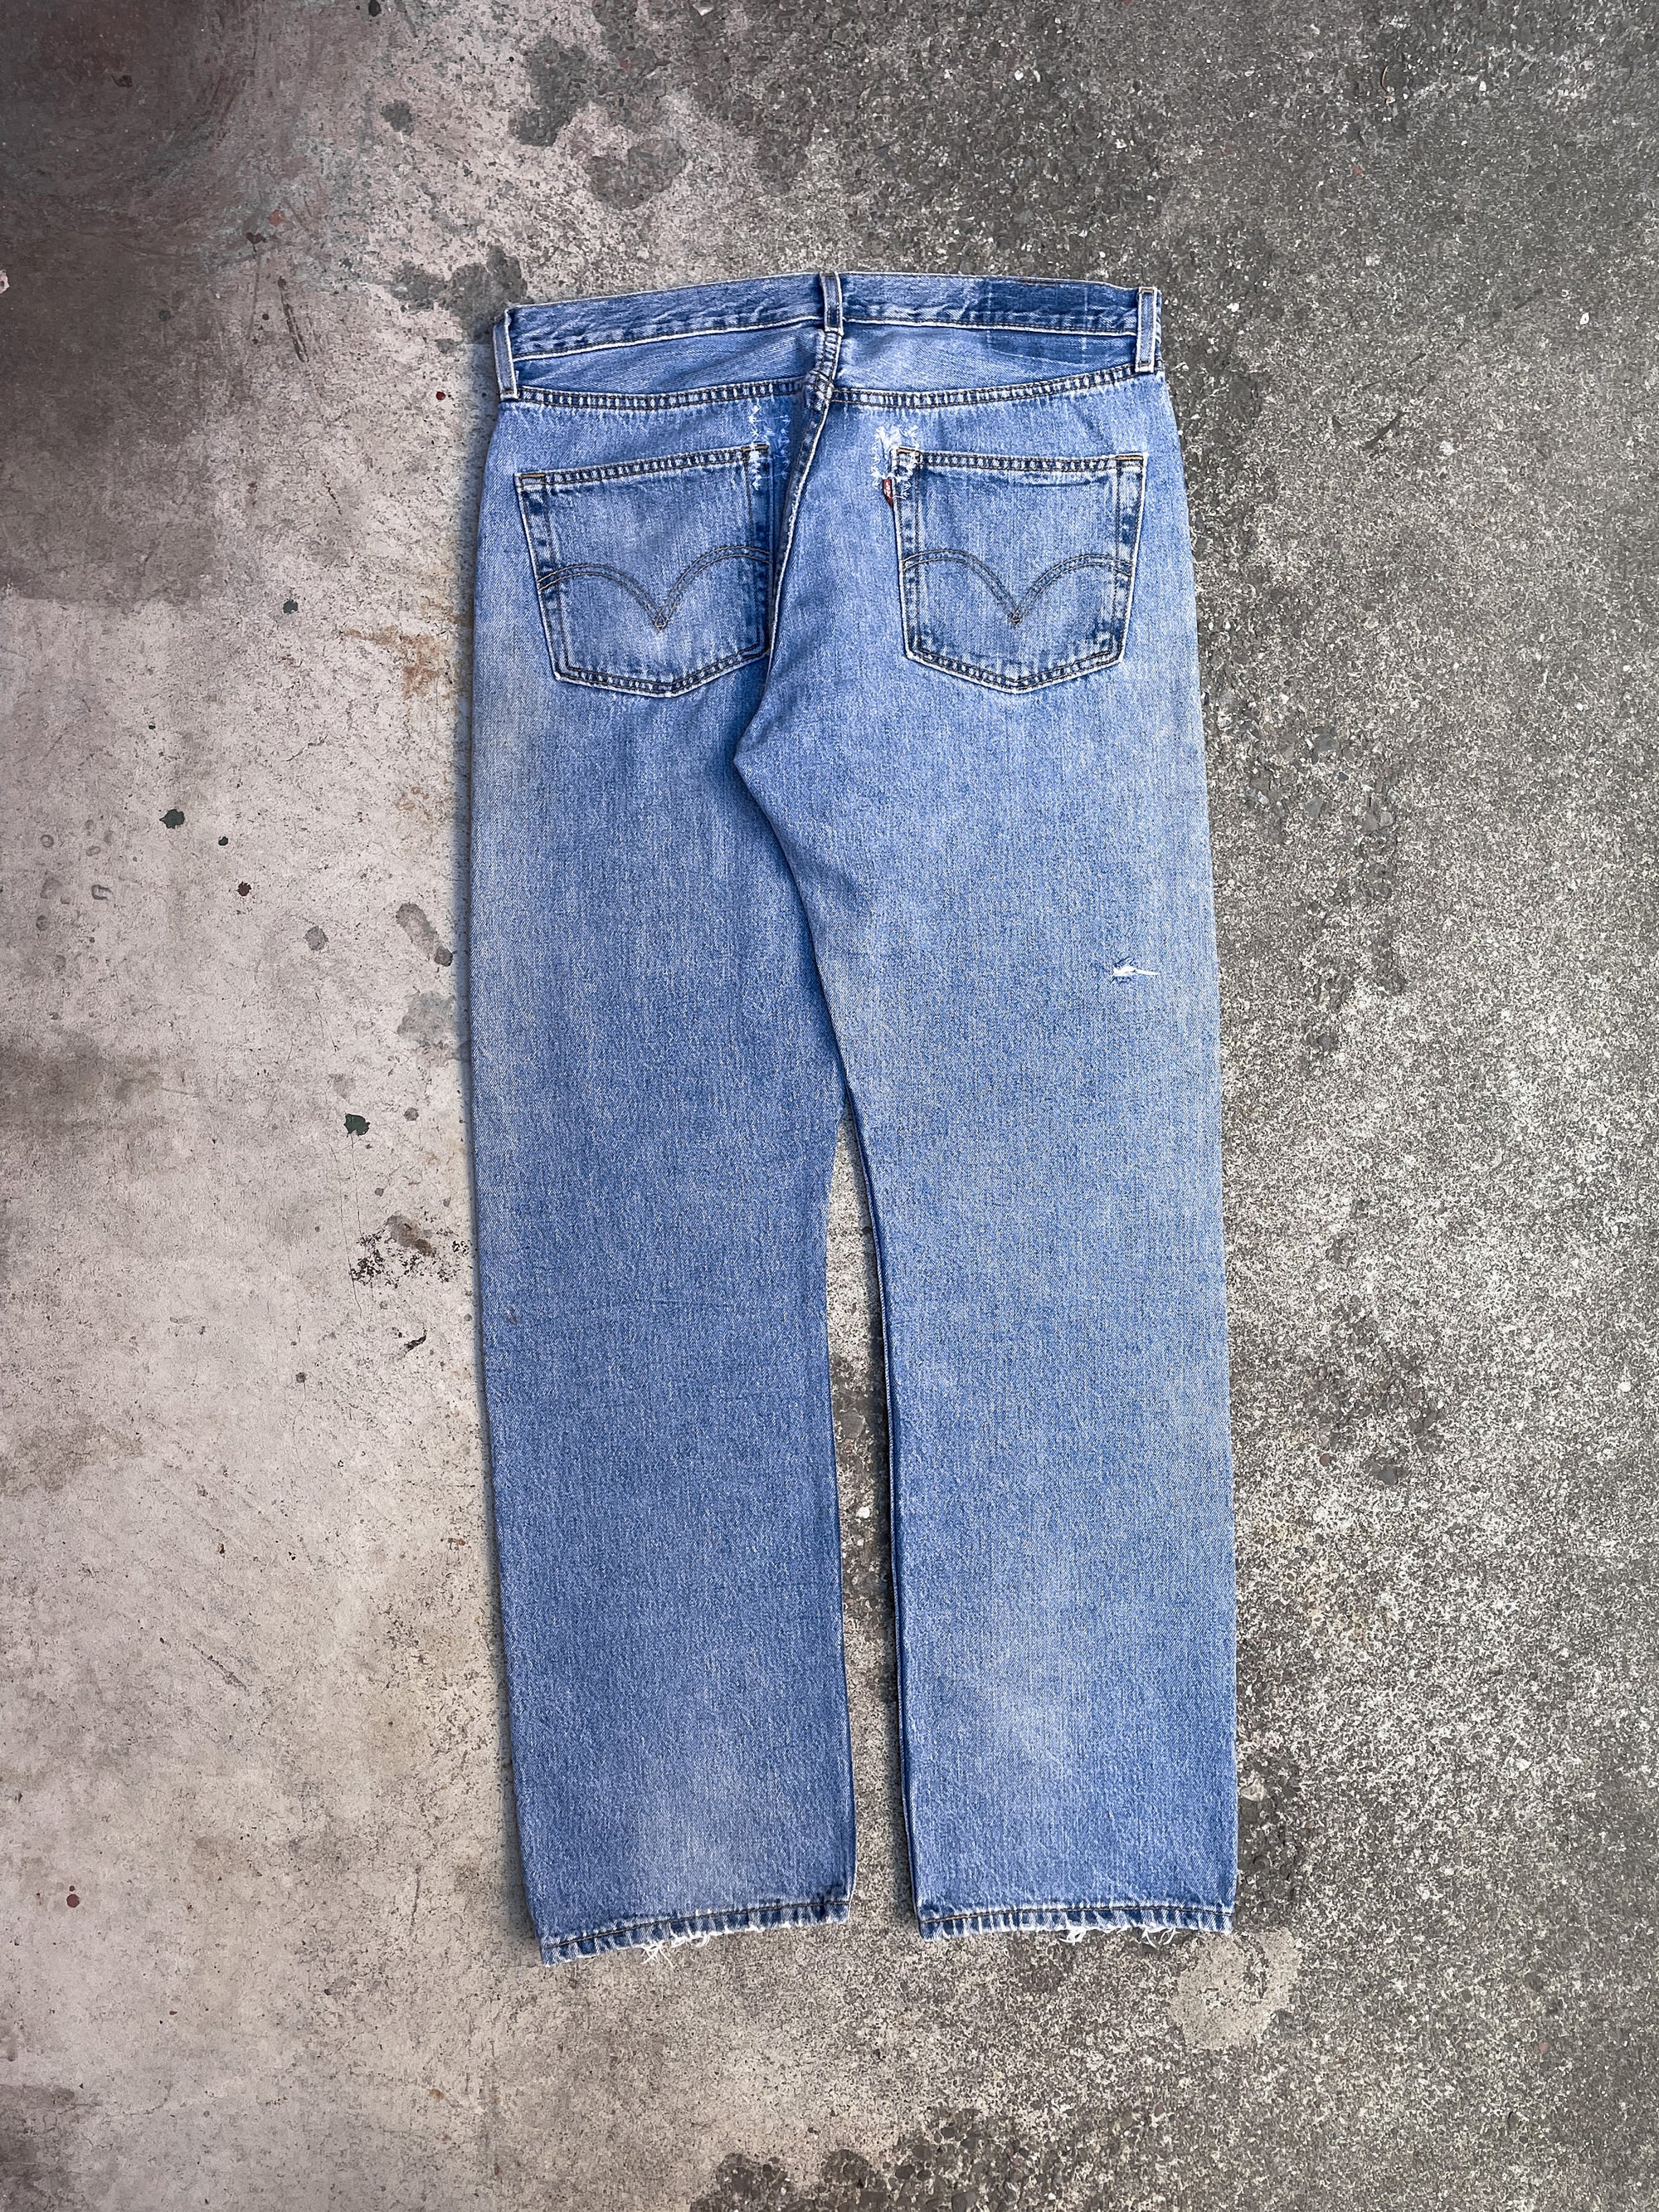 2000s Levi’s Repaired Distressed Blue 501 (34X32)